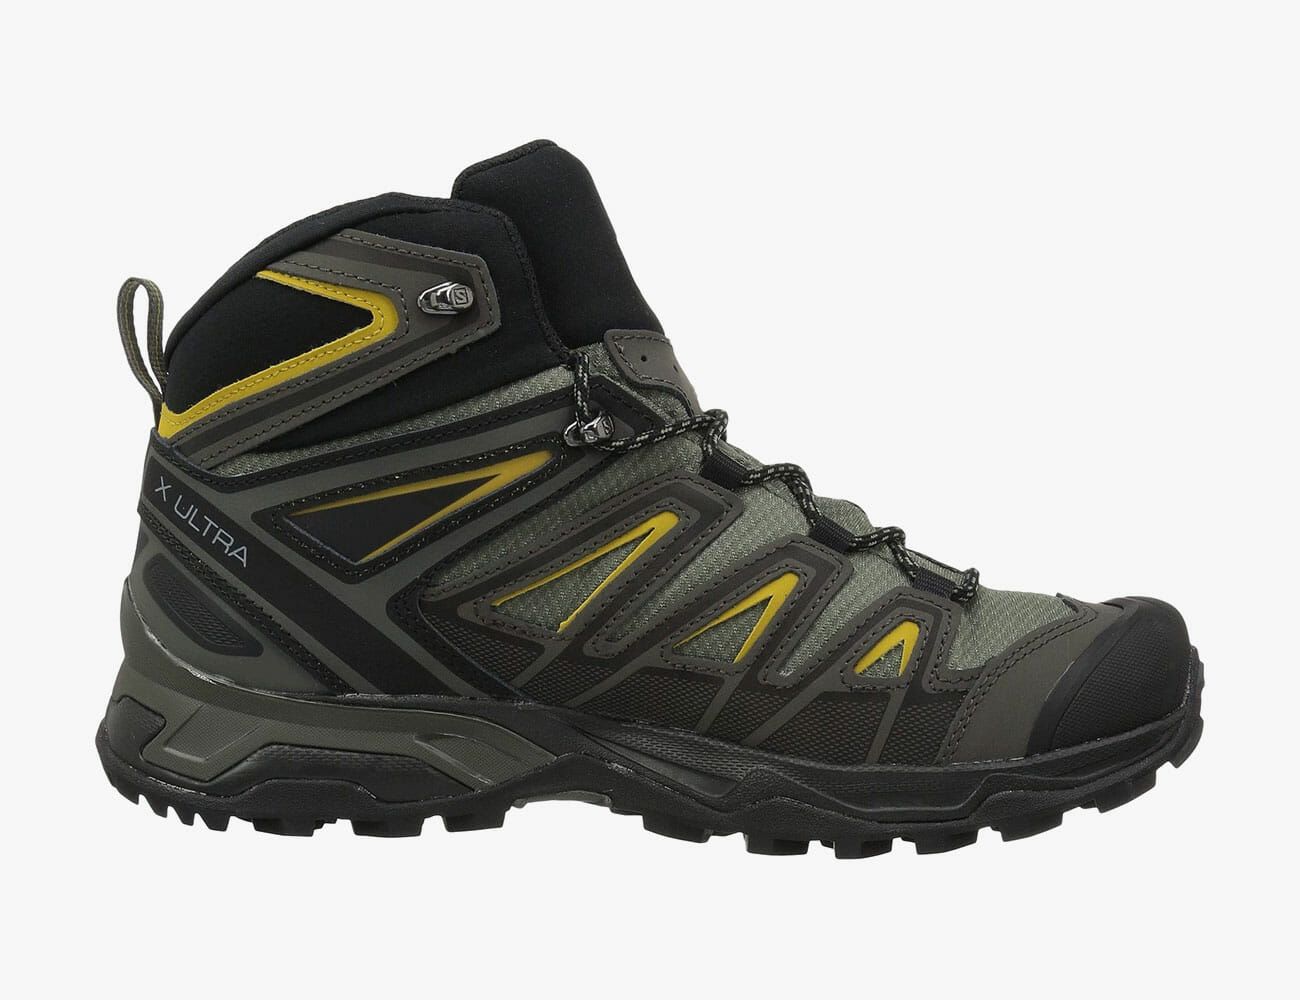 The Best Hiking Boots of 2020